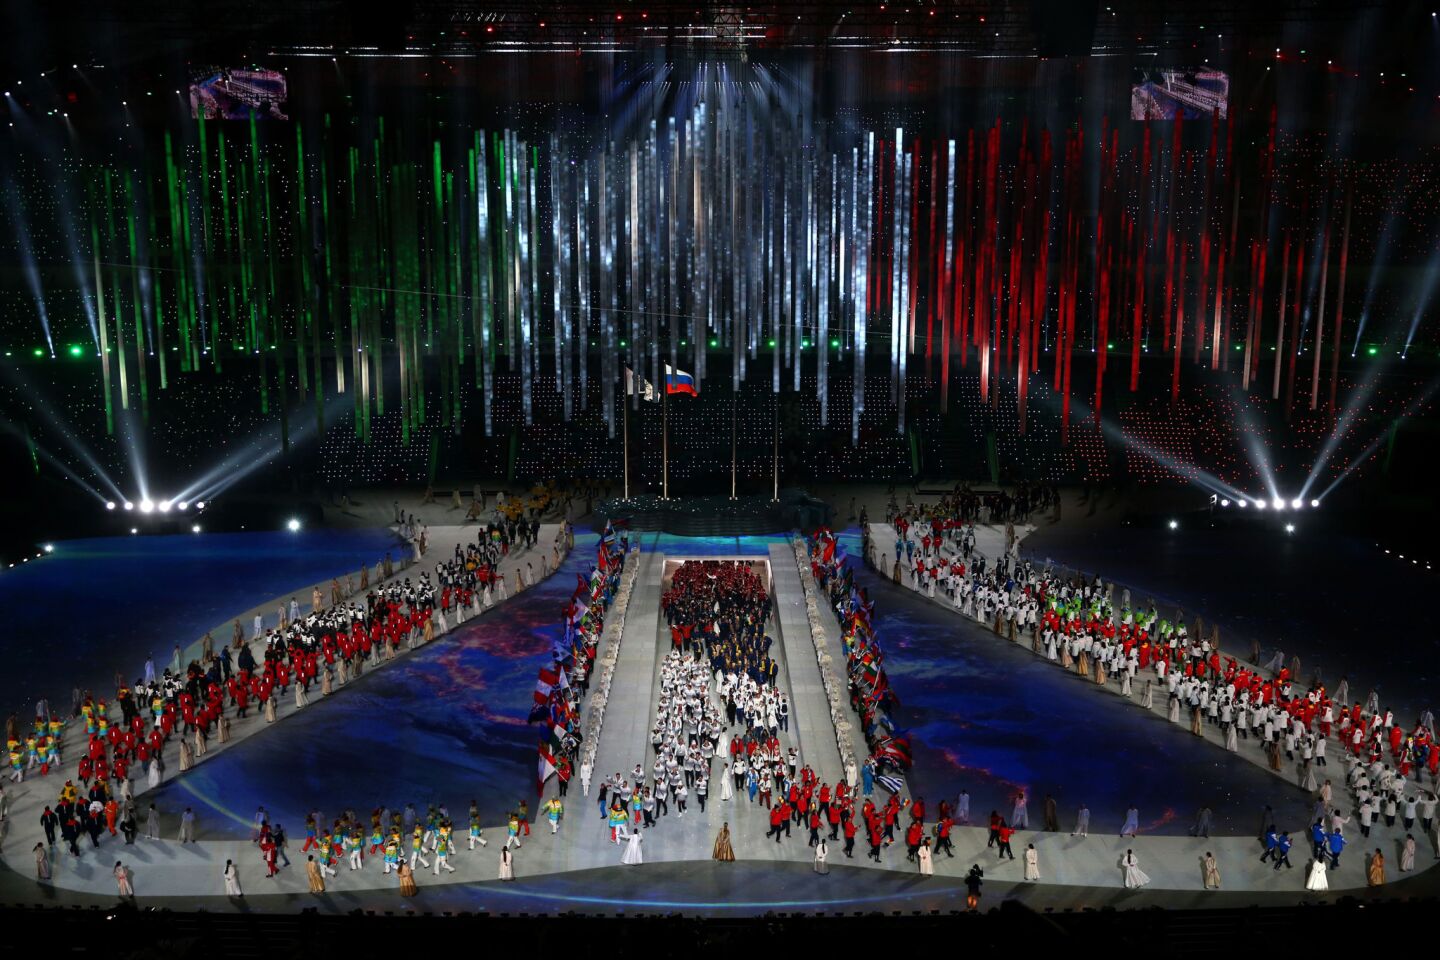 Athletes enter the arena during the 2014 Sochi Winter Olympics Closing Ceremony at Fisht Olympic Stadium.